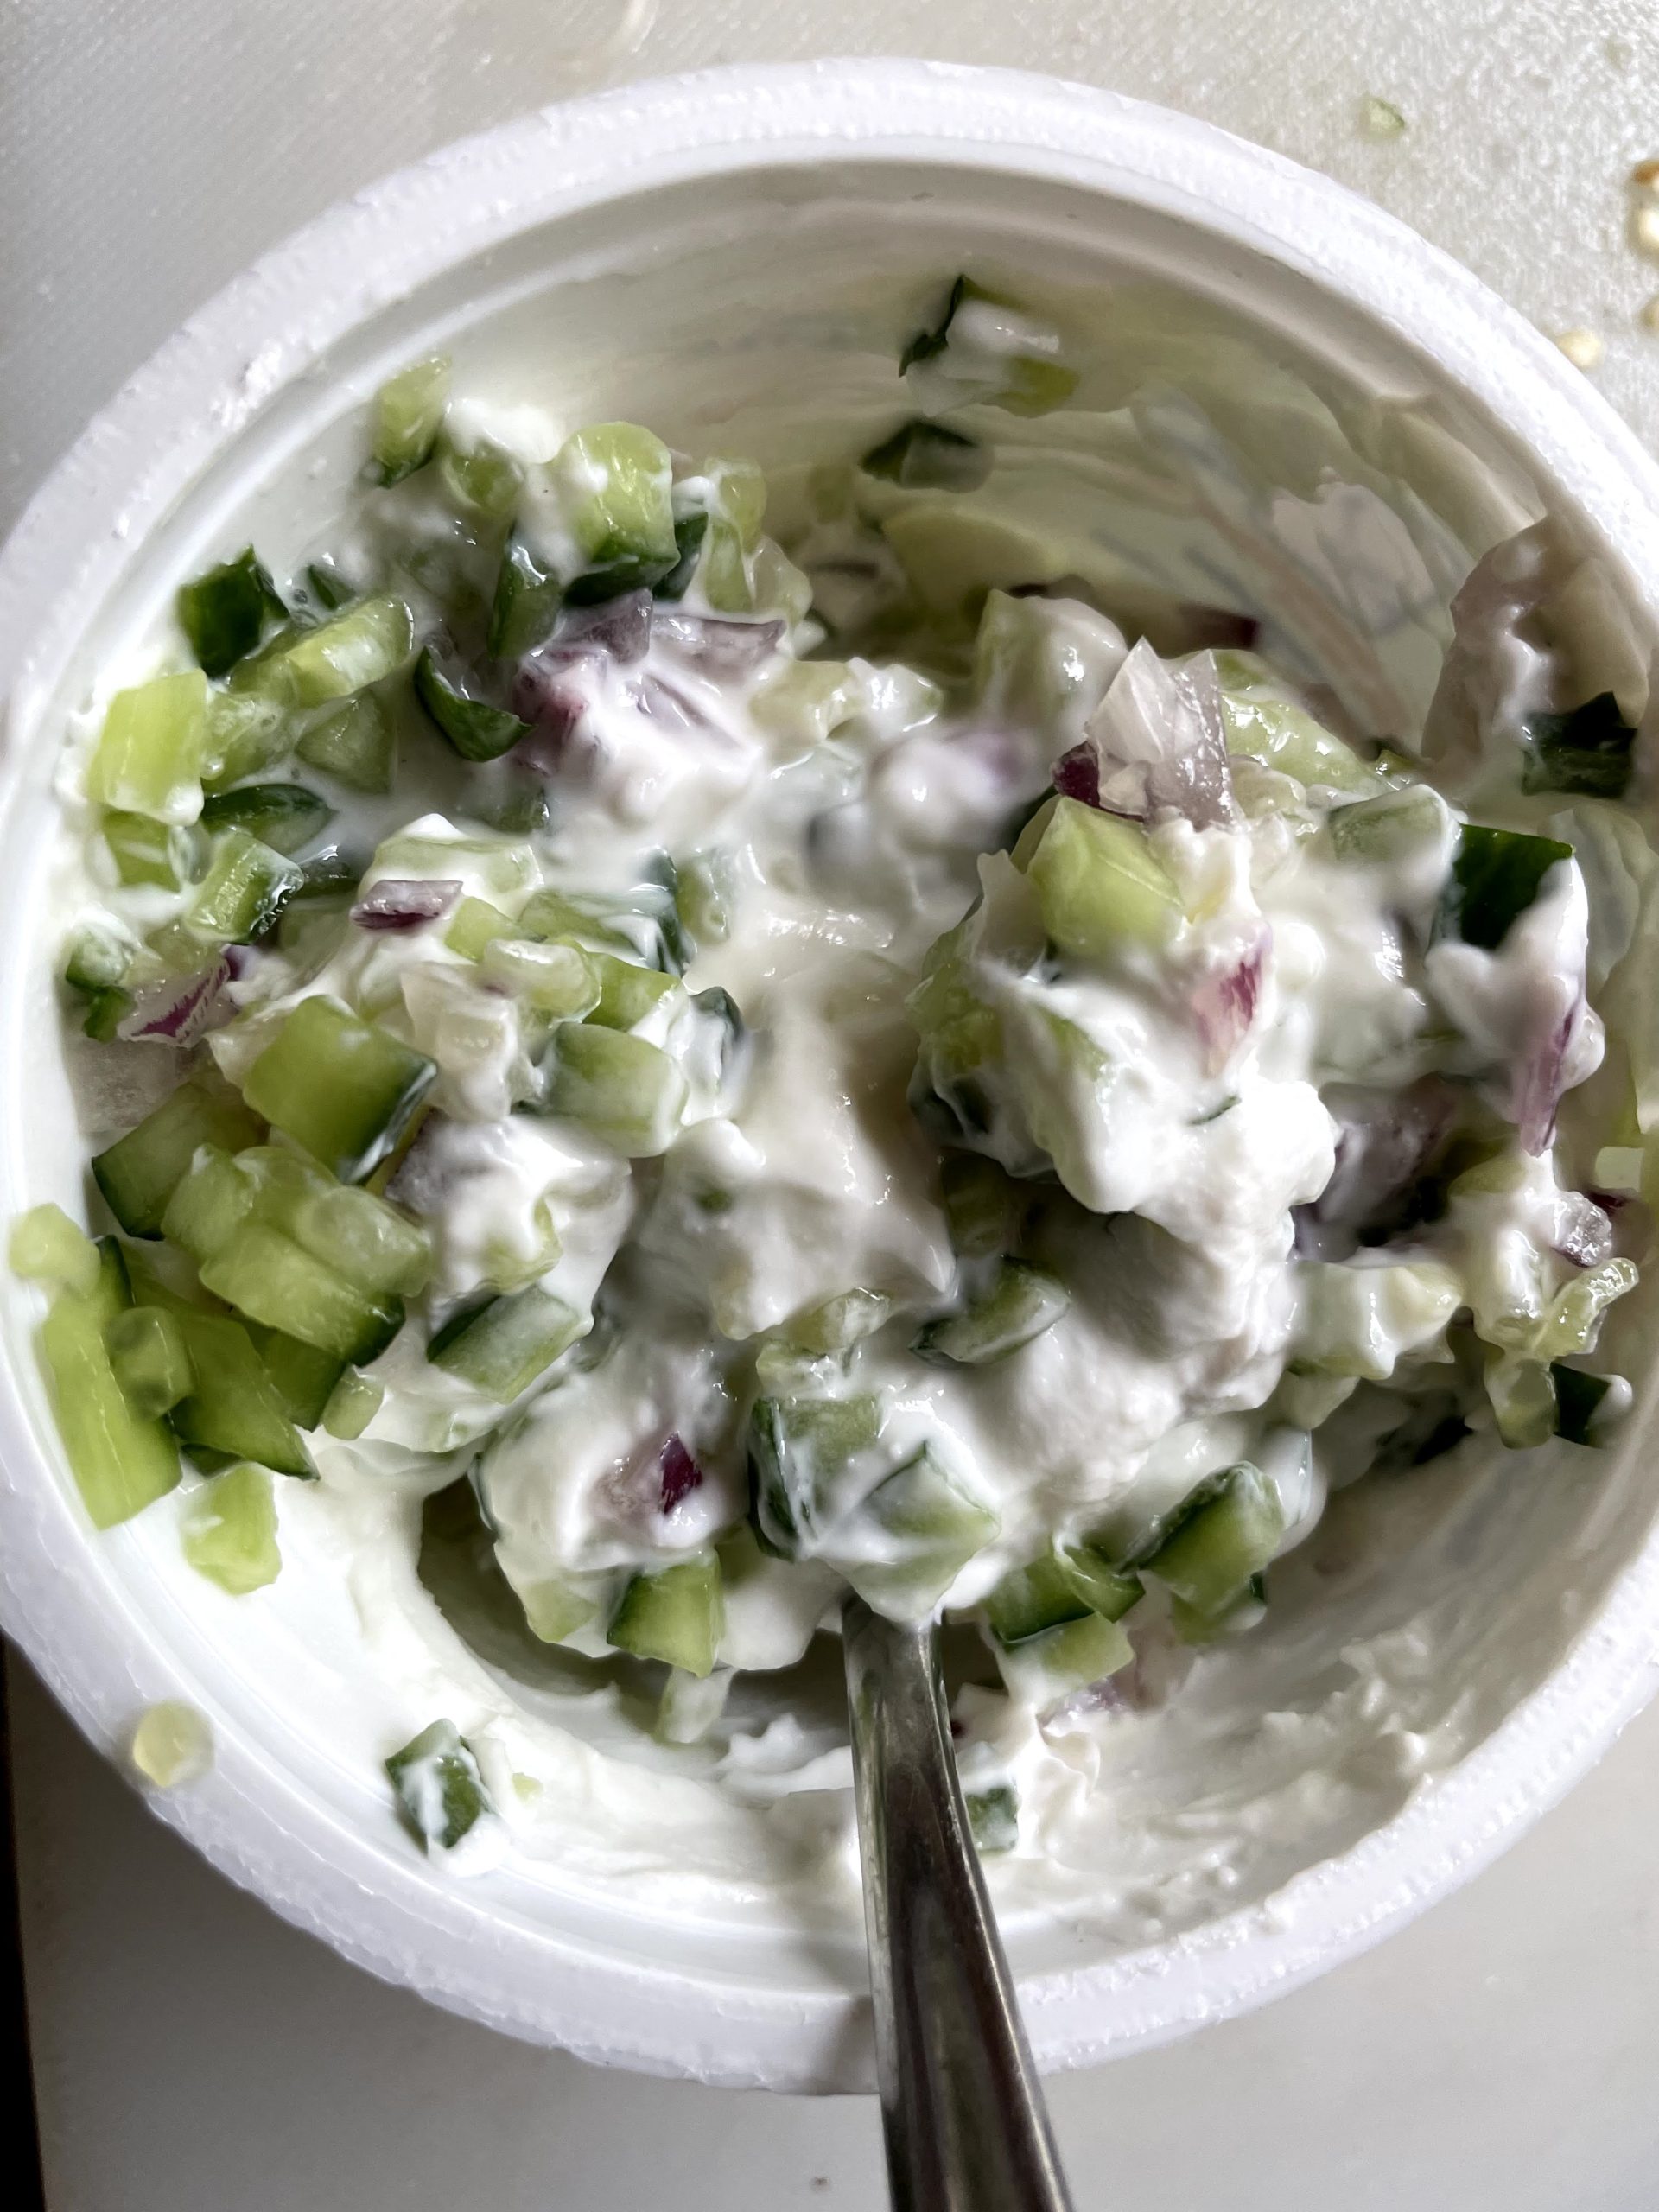 Mix yoghurt with chopped onion and cucumber